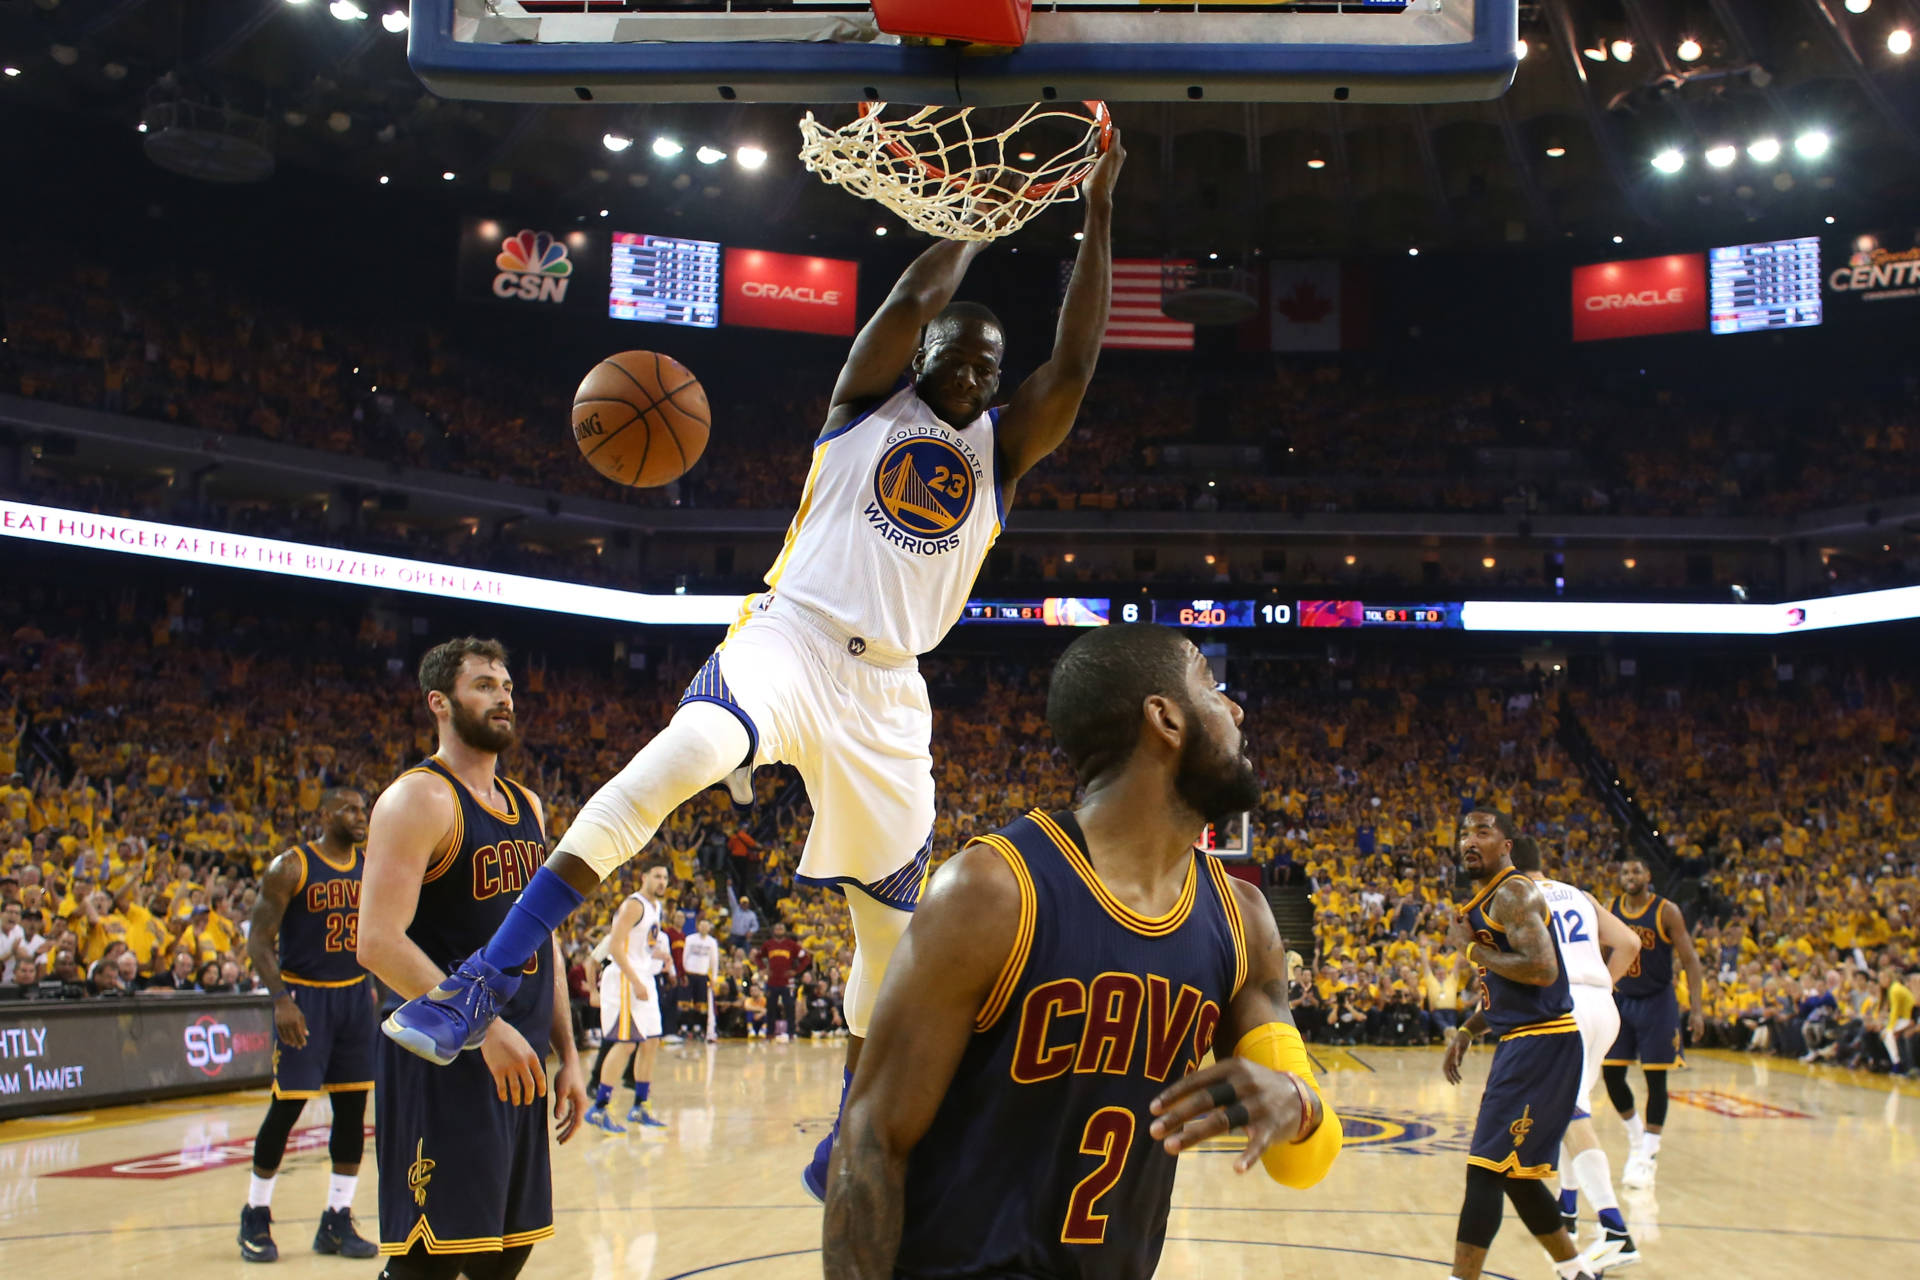 Draymond Green of the Golden State Warriors dunks the ball against the Cleveland Cavaliers in Game 2 of the 2016 NBA Finals. Ezra Shaw/Getty Images